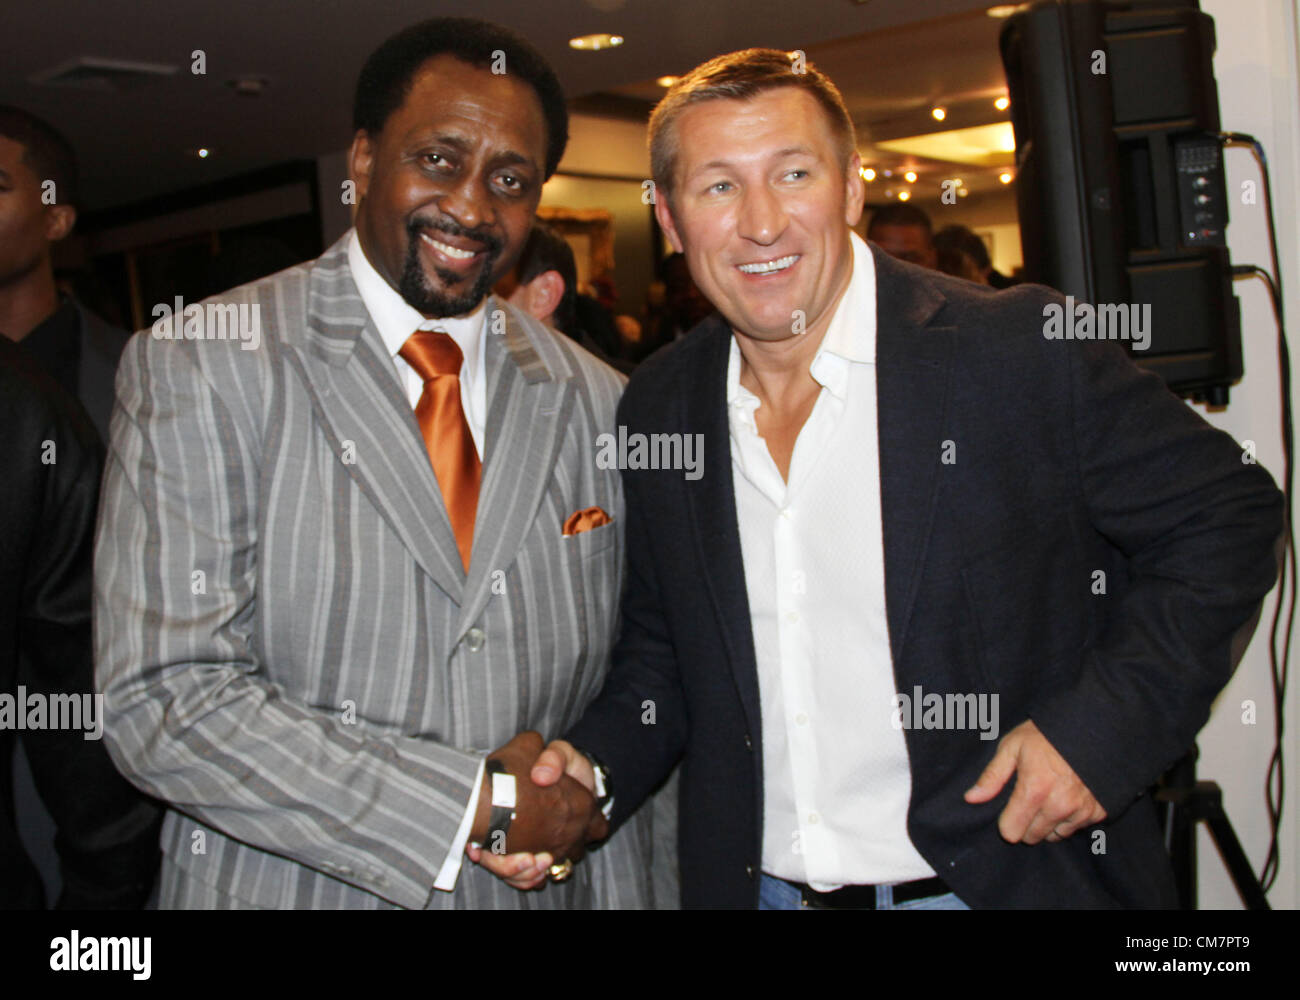 Oct. 19, 2012 - Los Angeles, California, USA - Former Welter Weight Champion Thomas ''The Hitman''   Hearns poses with fan during 50th birthday celebration for   Five time World Heavy Weight Champion Evander ''The Real   Deal'' Holyfield at Julien's Auctions in Beverly Hills, CA. on   Friday October 19, 2012. (Credit Image: © Burt Harris/Prensa Internacional/ZUMAPRESS.com) Stock Photo